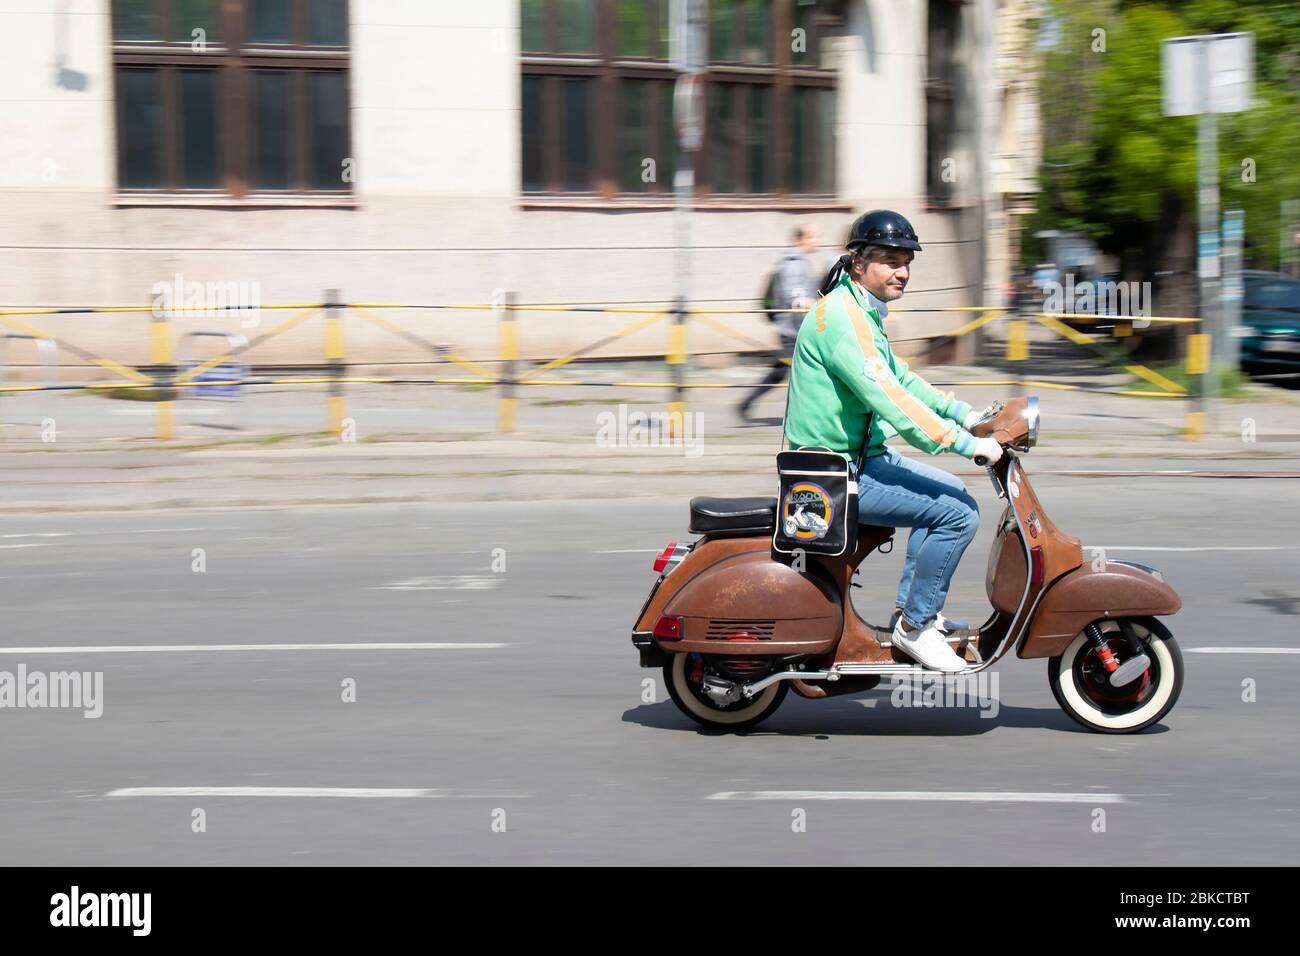 Belgrade, Serbia - April 24, 2020: Mature man in retro outfit riding vintage scooter vespa on empty city street in Dorcol area, on a sunny day Stock Photo